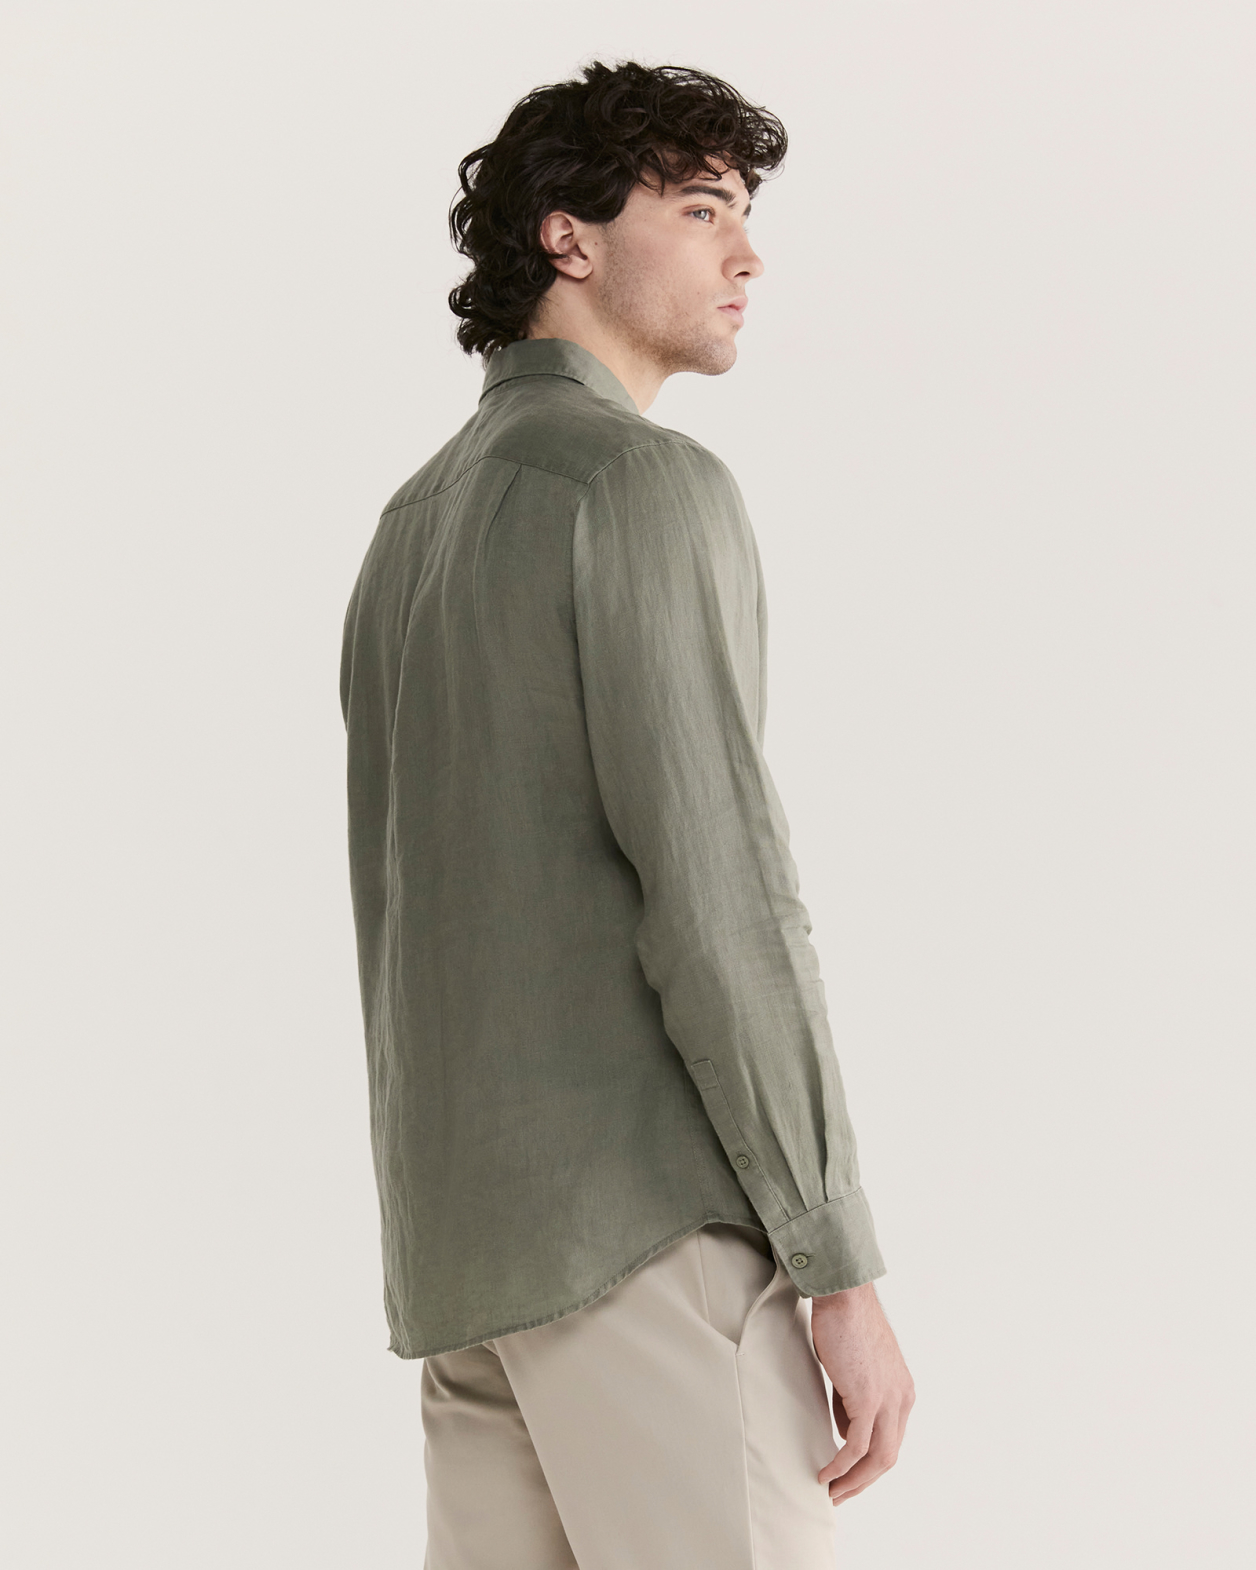 Anderson Long Sleeve Classic Linen Shirt in MOSS